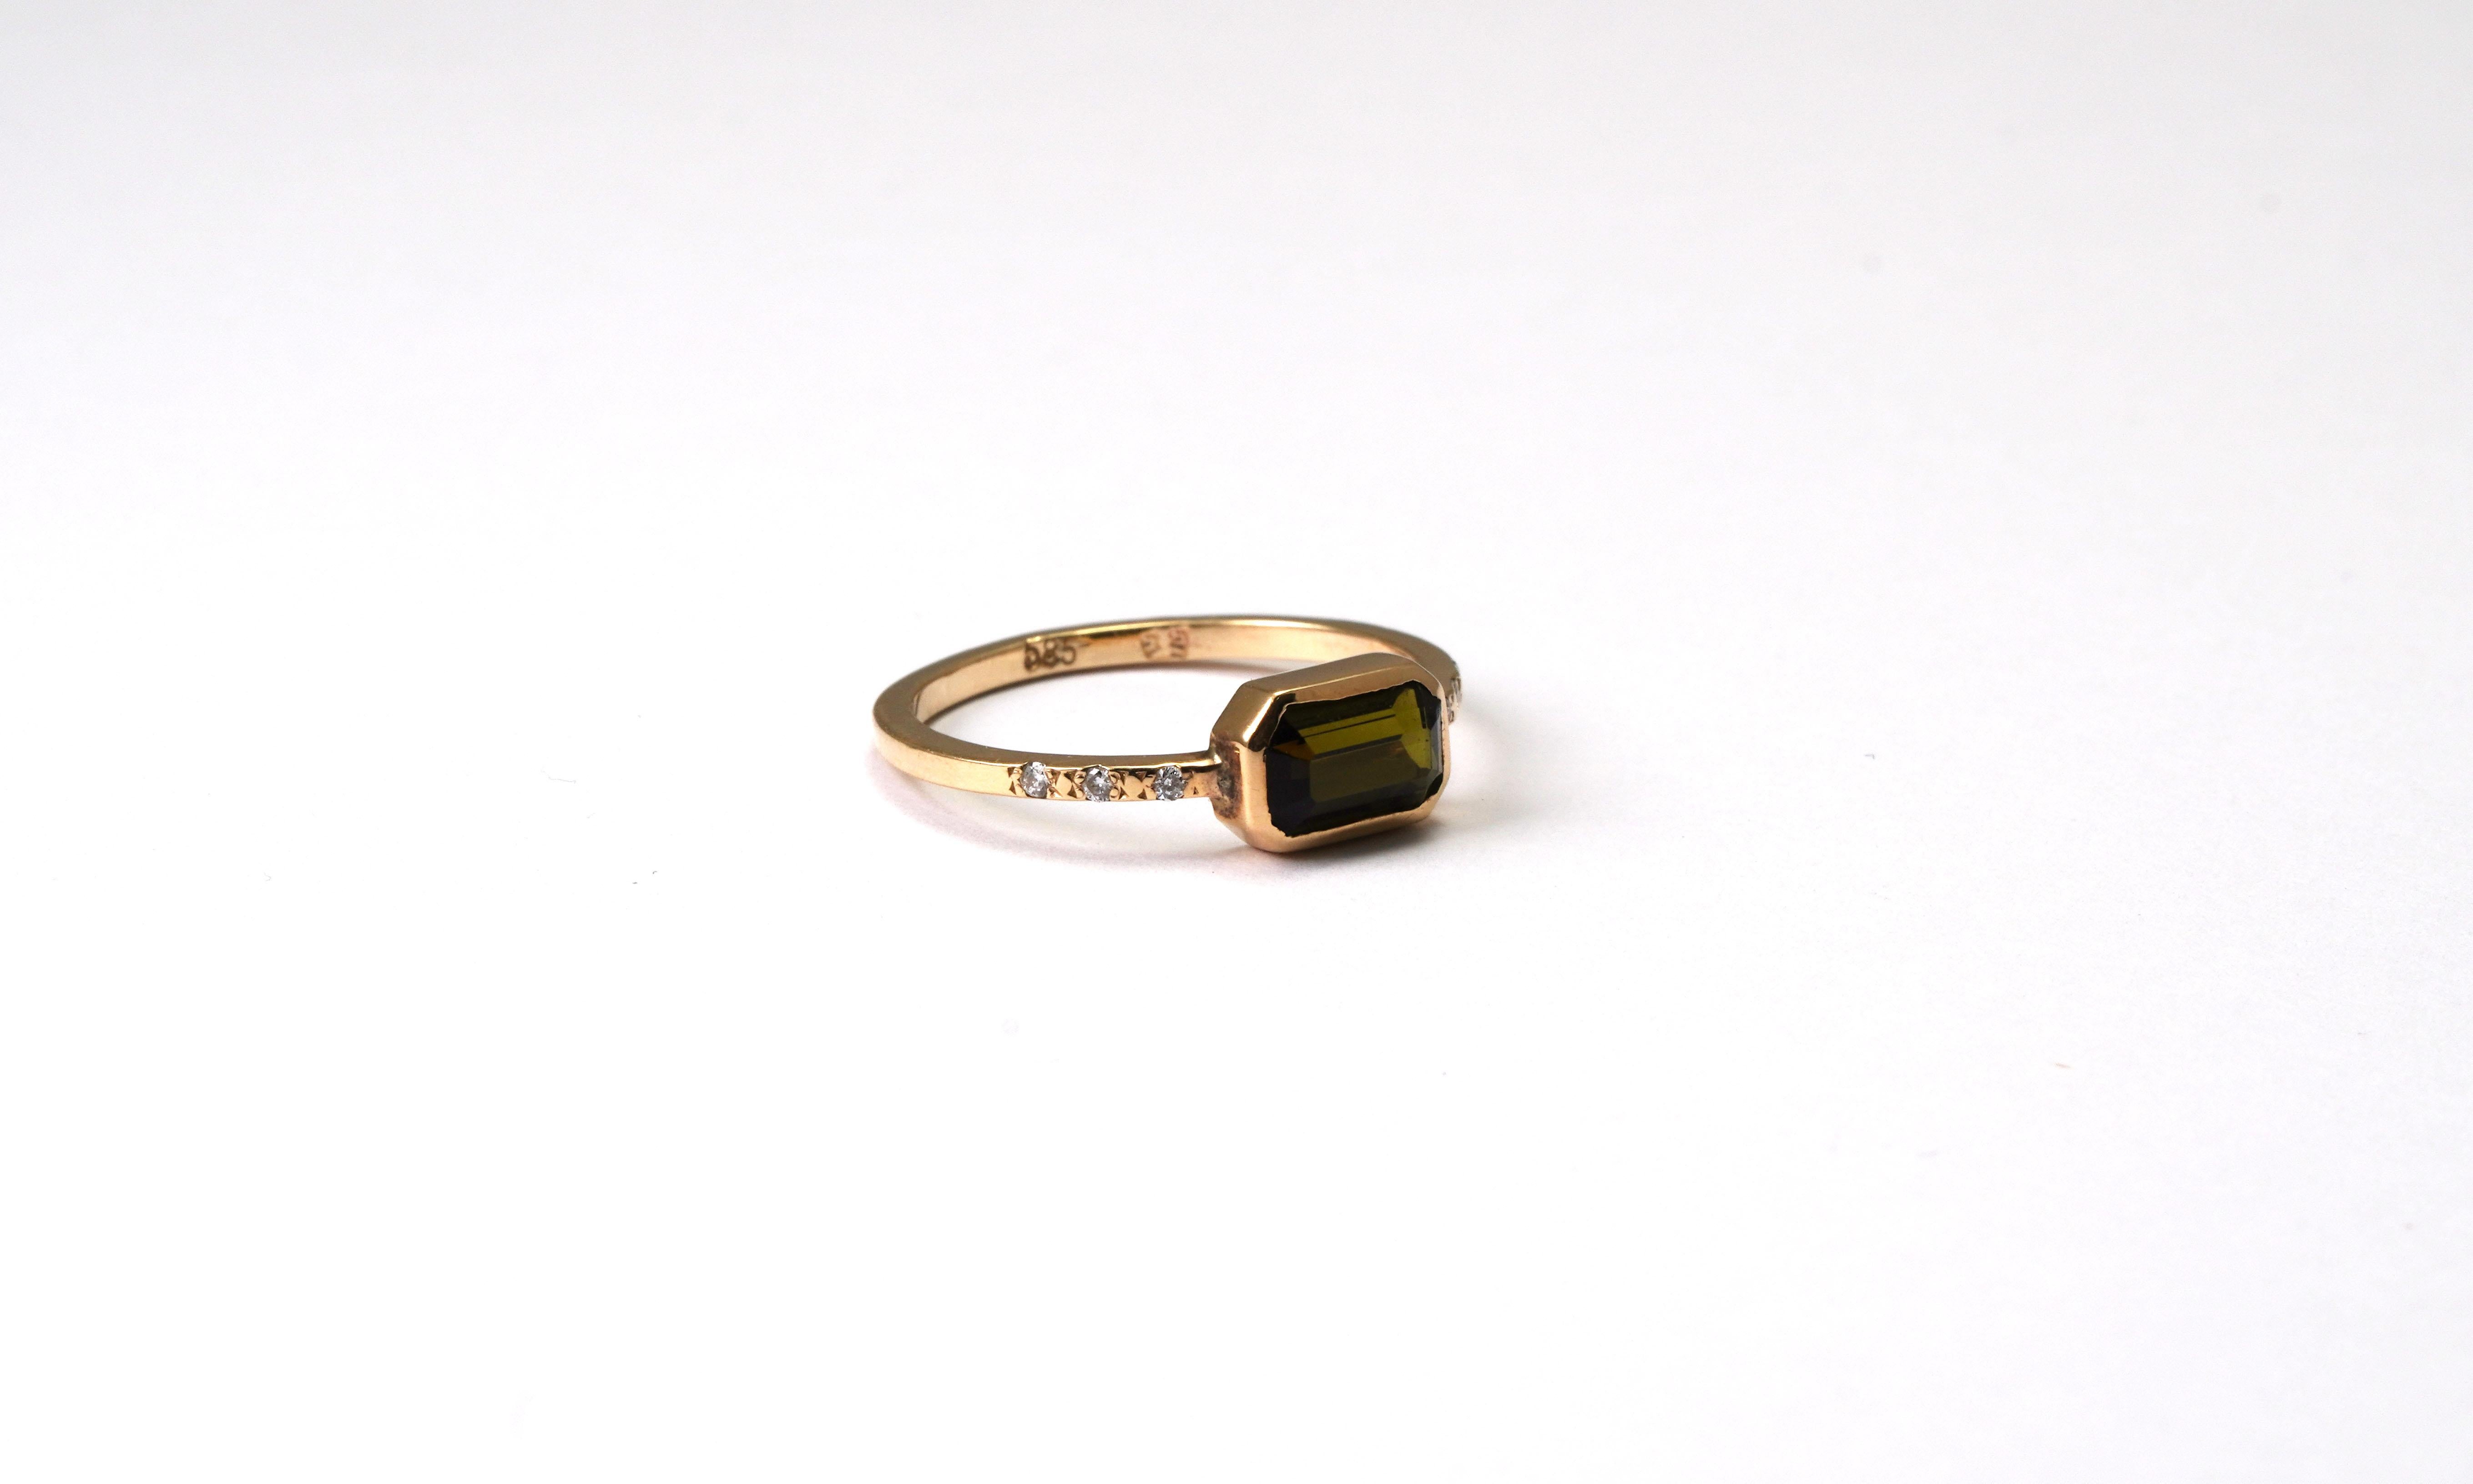 14 kt Gold Ring with Green Tourmaline and Diamonds
Gold color: Yellow
Ring size: 5 US
Total weight: 1.35 grams

Set with:
- Tourmaline
Cut: Emerald
Color: Green
Weight: 0.86 carats

- 6 Diamonds of total: 0.04 ct
Cut: Brilliant